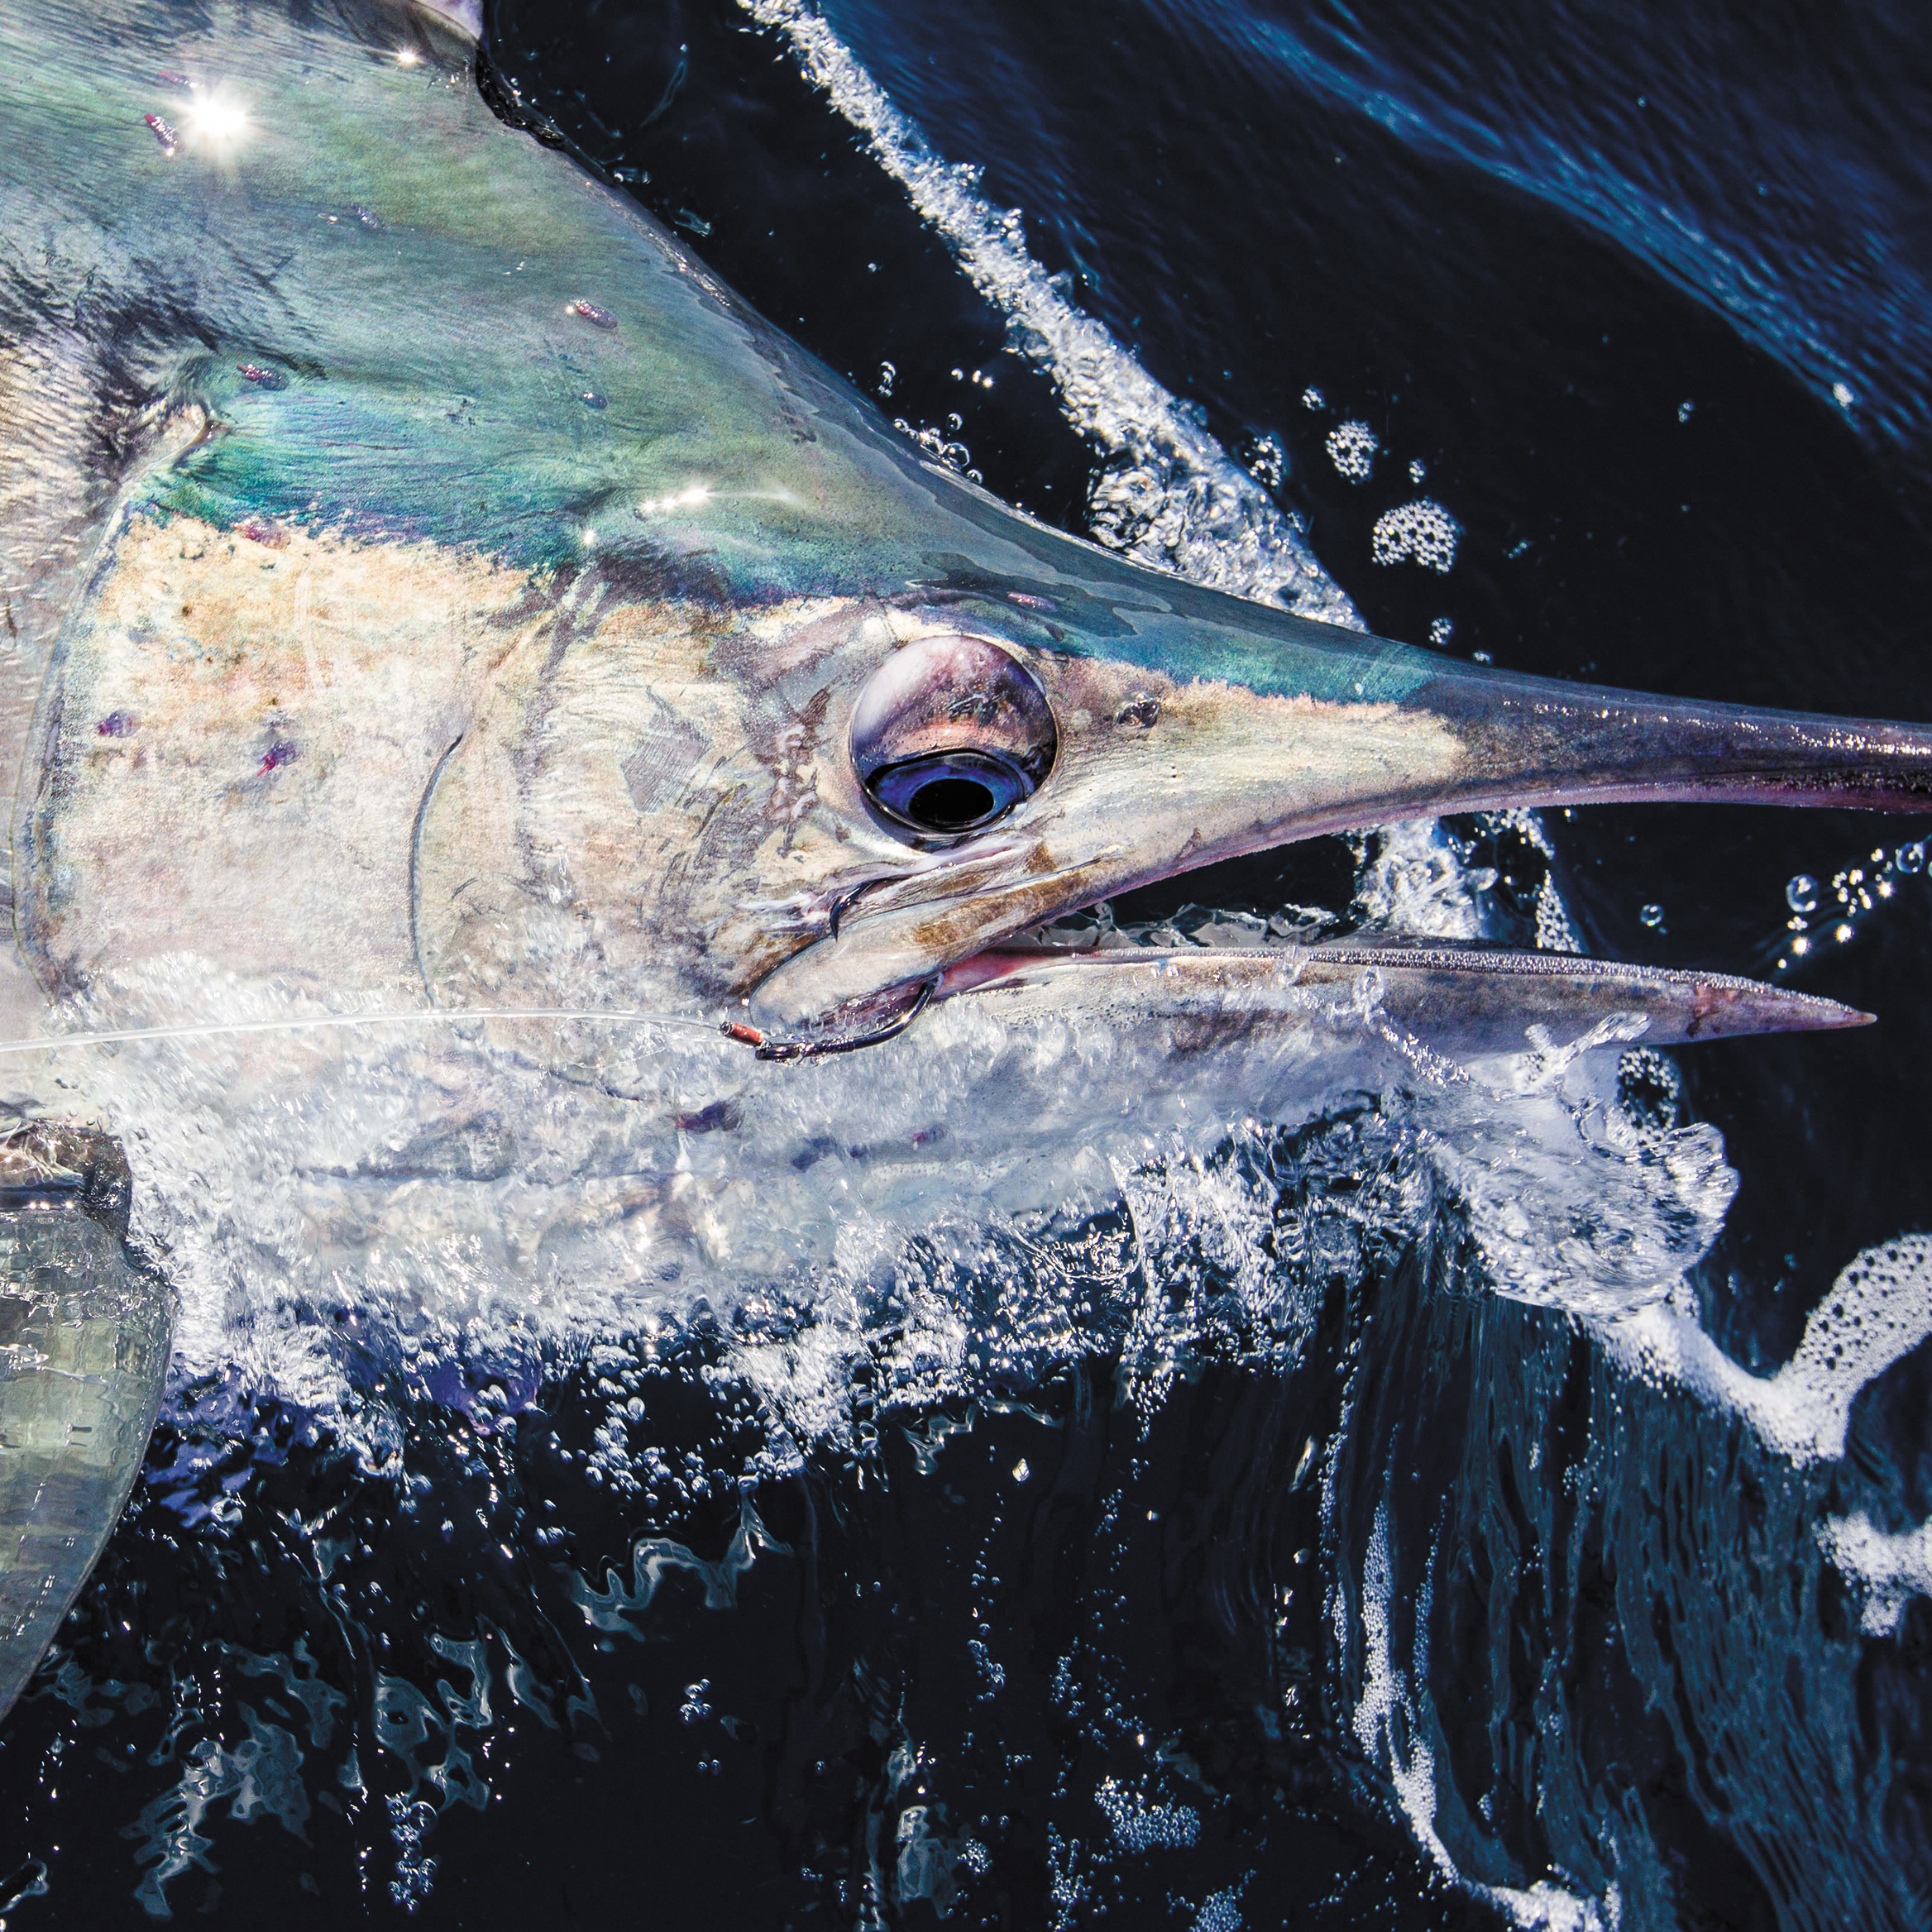 photography for NSW DPI fisheries annual report